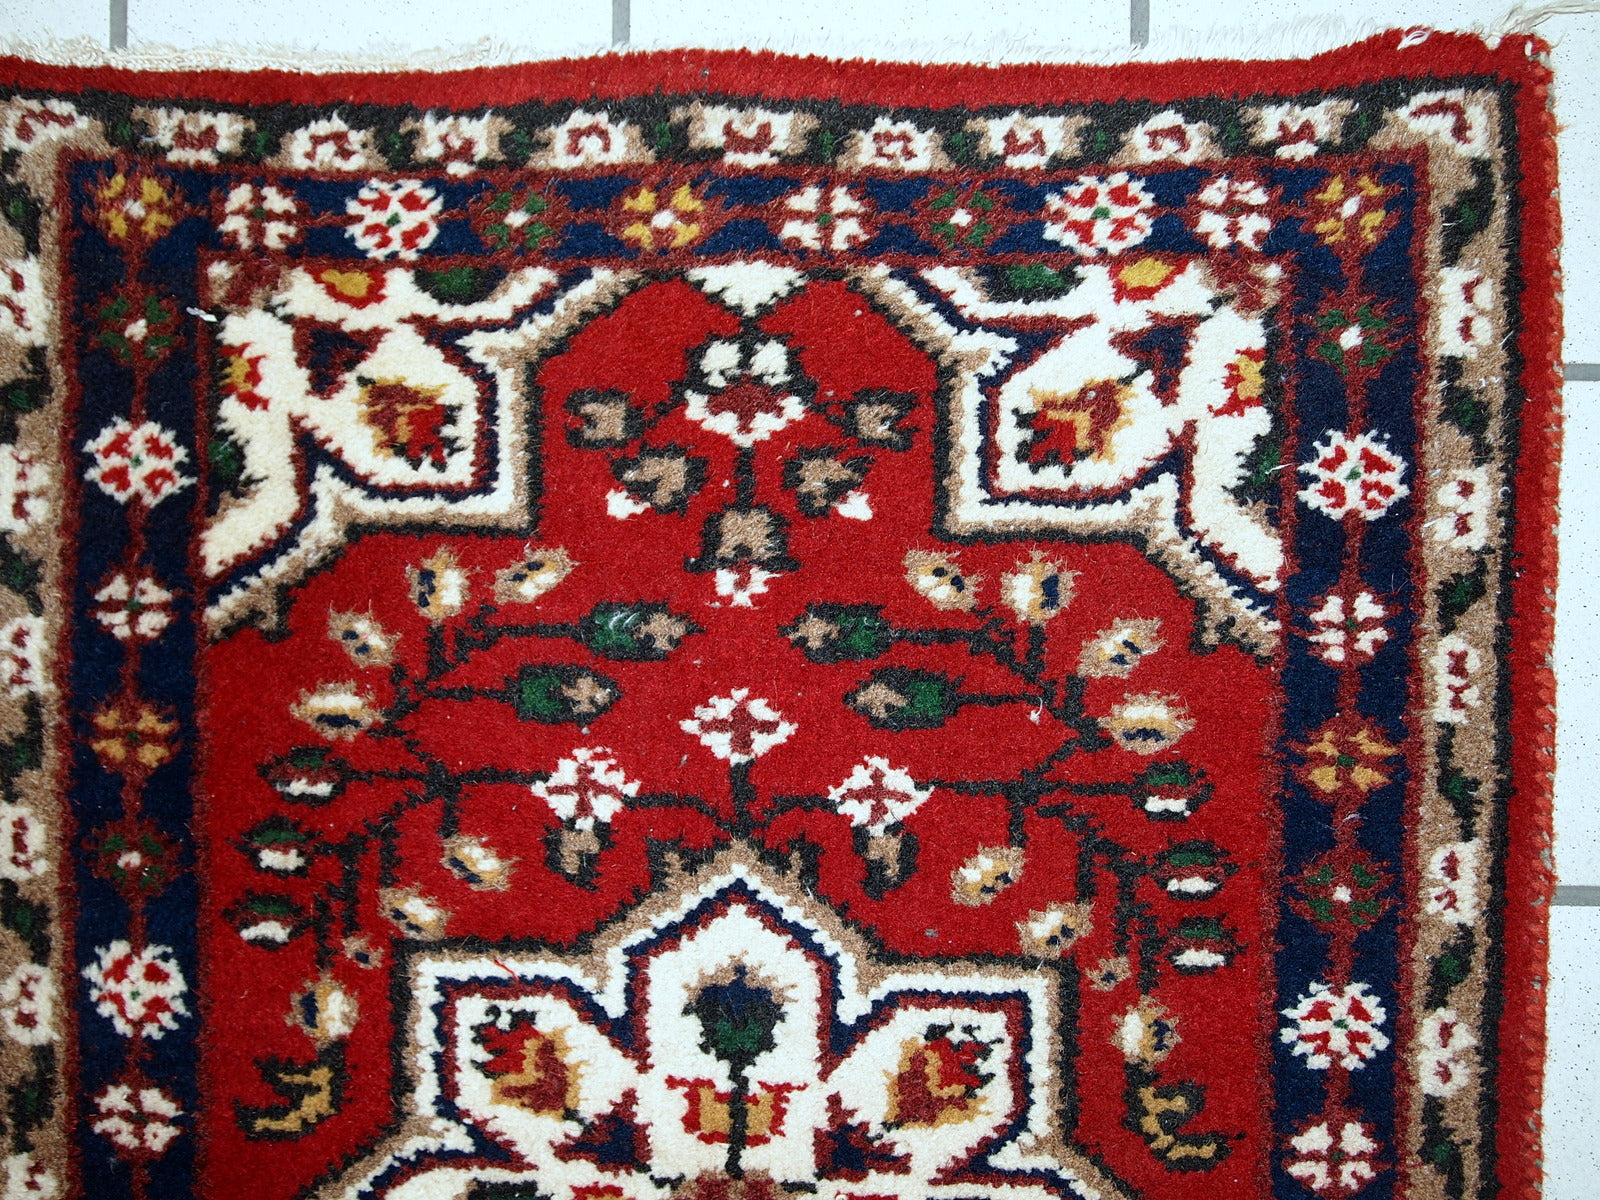 Handmade vintage Hamadan rug in bright red shade. The rug is in original good condition from the end of 20th century.